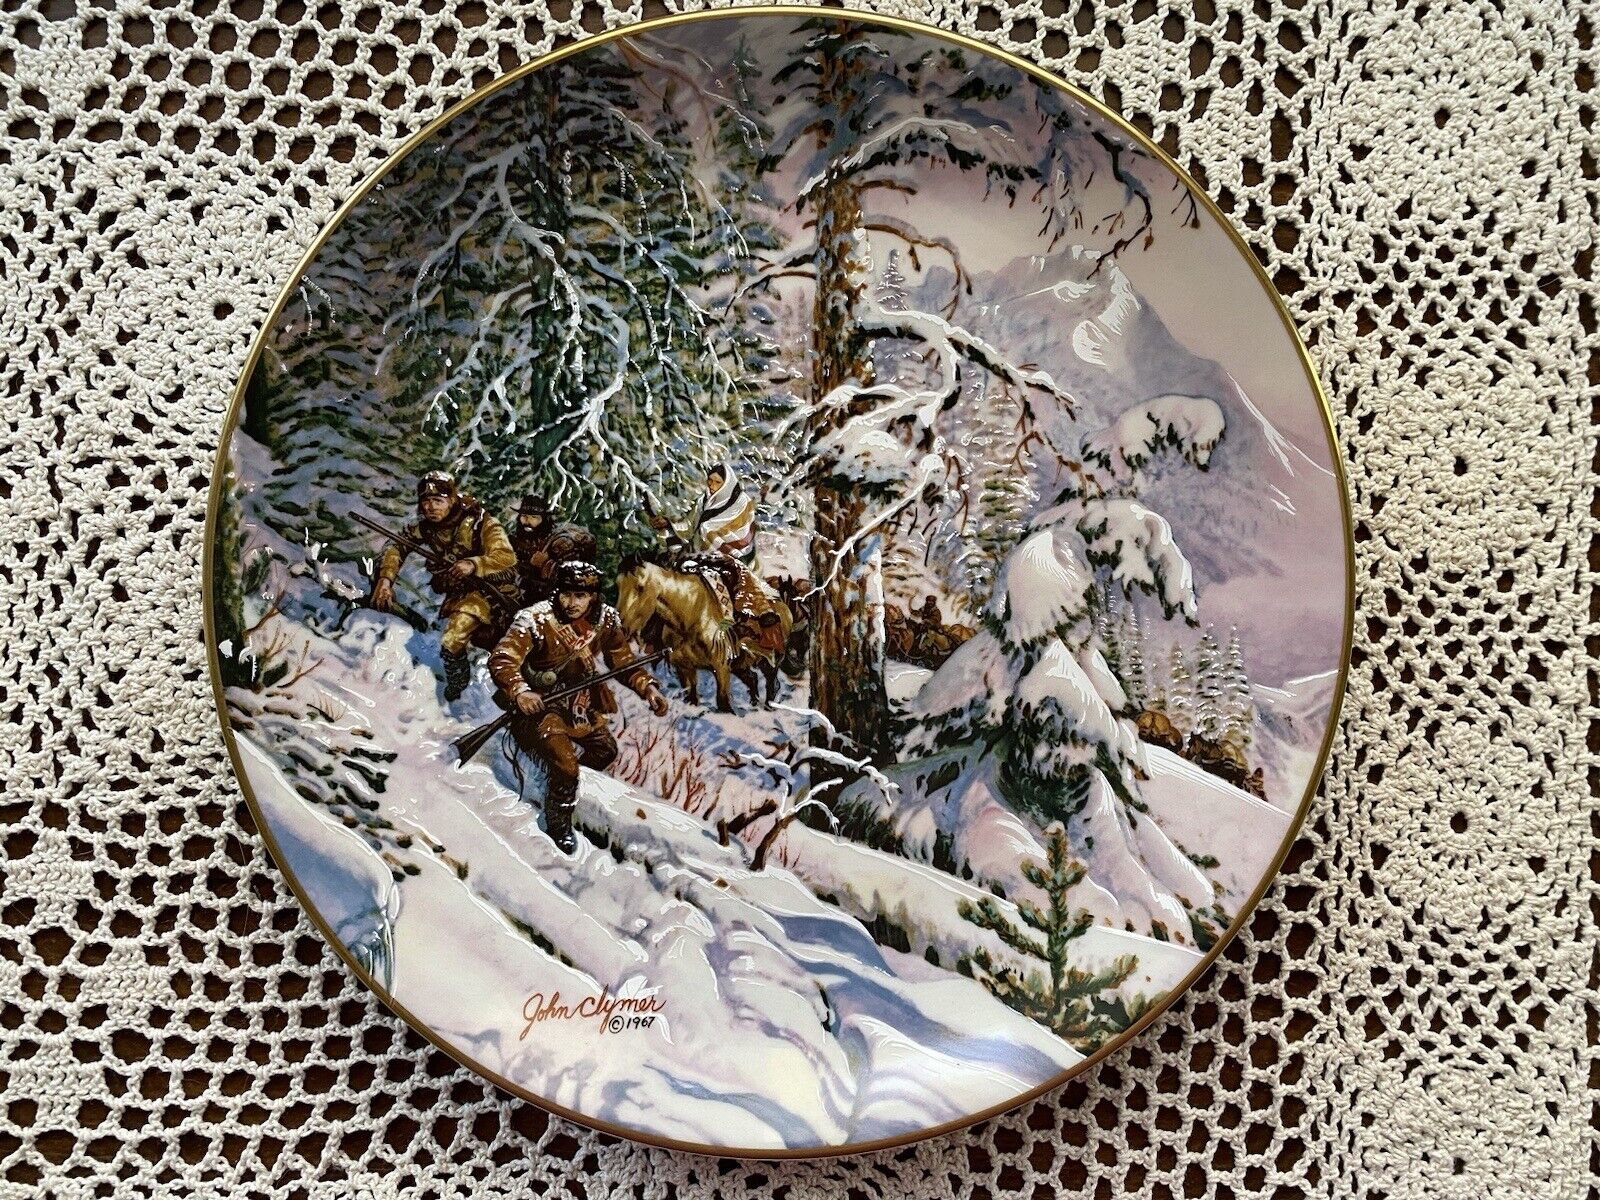 1982 “Lewis & Clark In The Bitterroots” Hamilton Collection Plate #5026